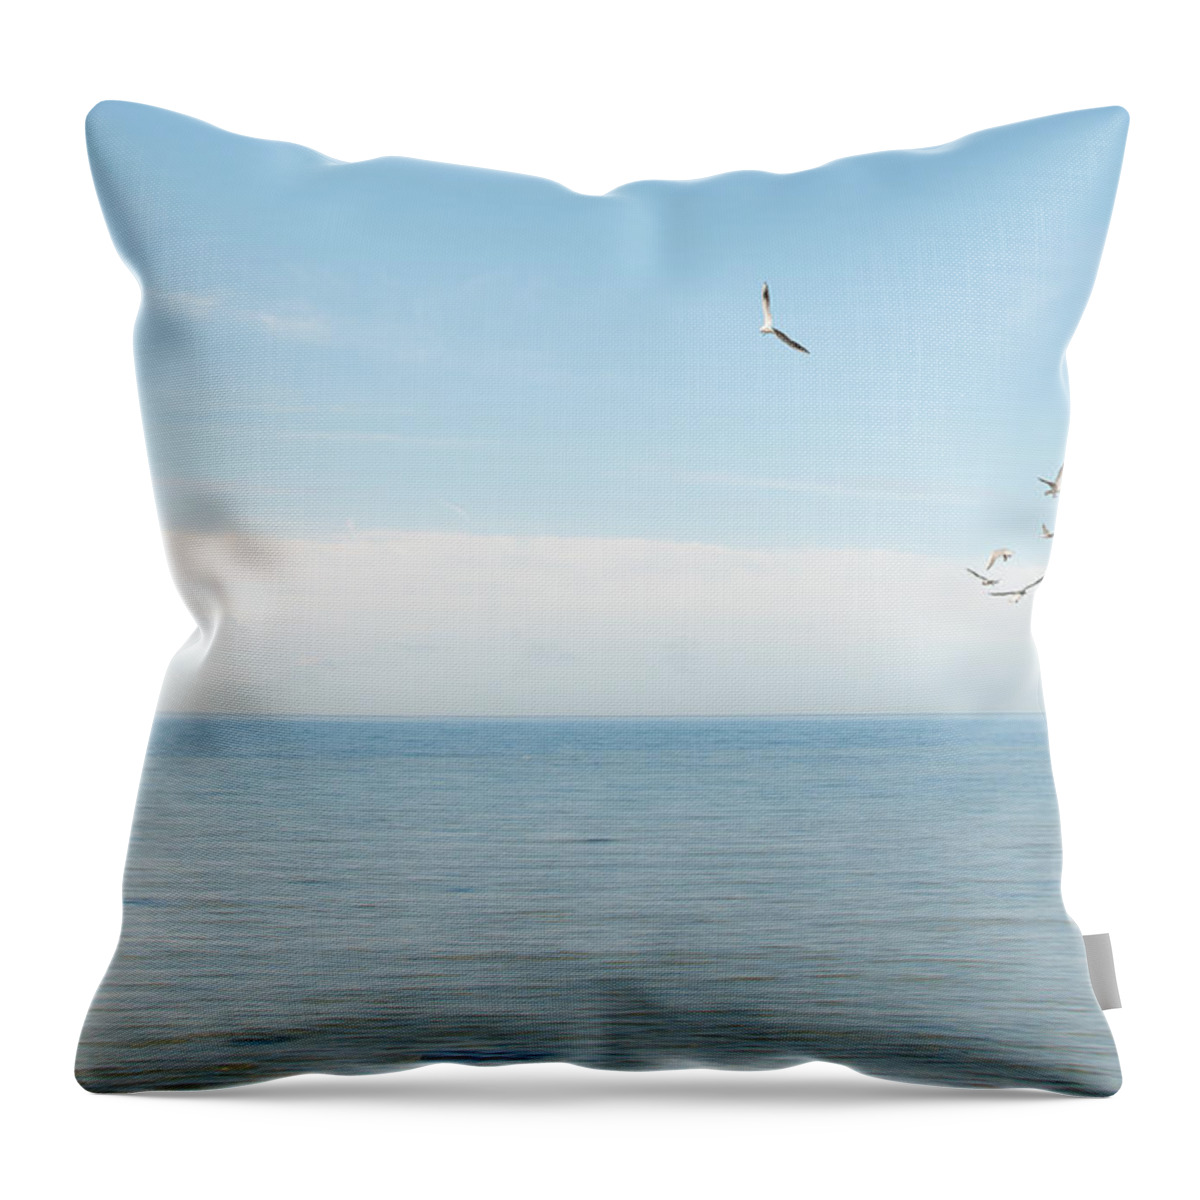 Abstract Throw Pillow featuring the photograph Tranquility by Marcus Karlsson Sall